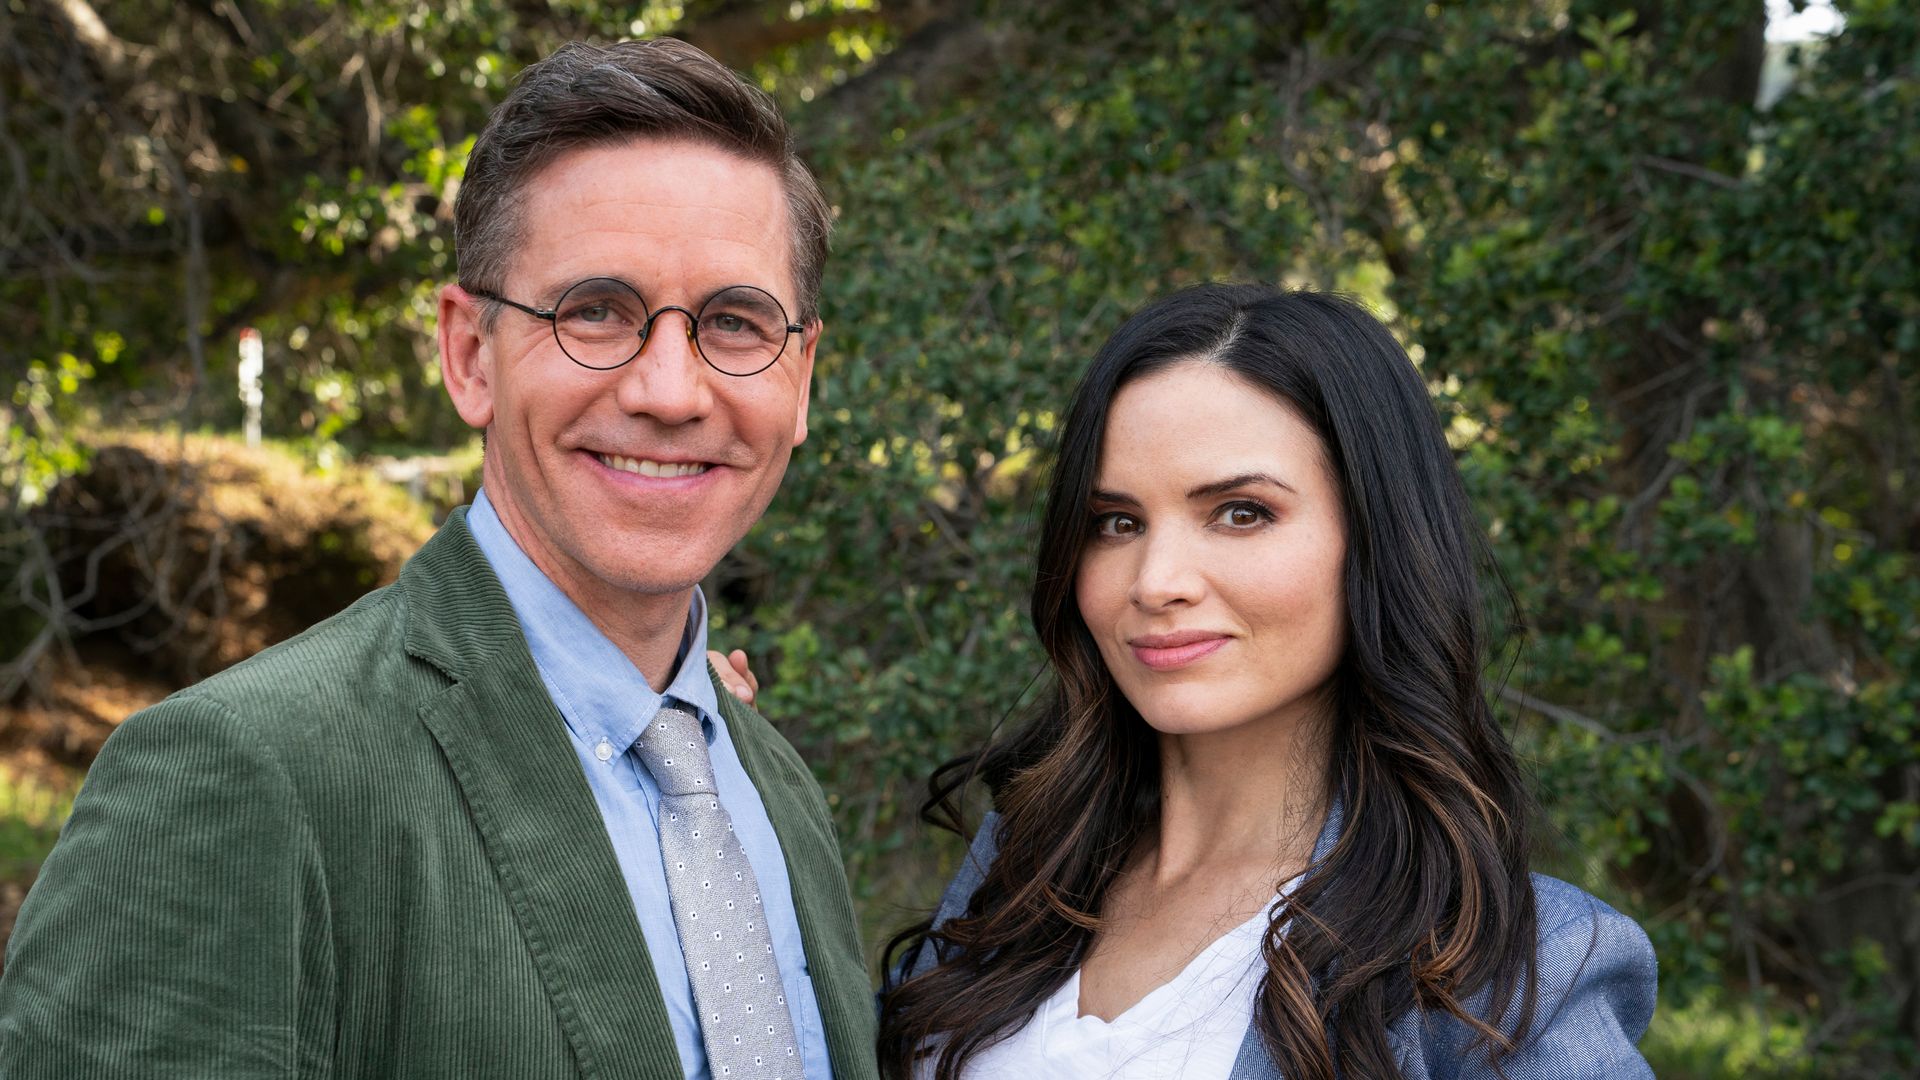 Brian Dietzen as Jimmy Palmer and Katrina Law as NCIS Special Agent Jessica Knight in NCIS